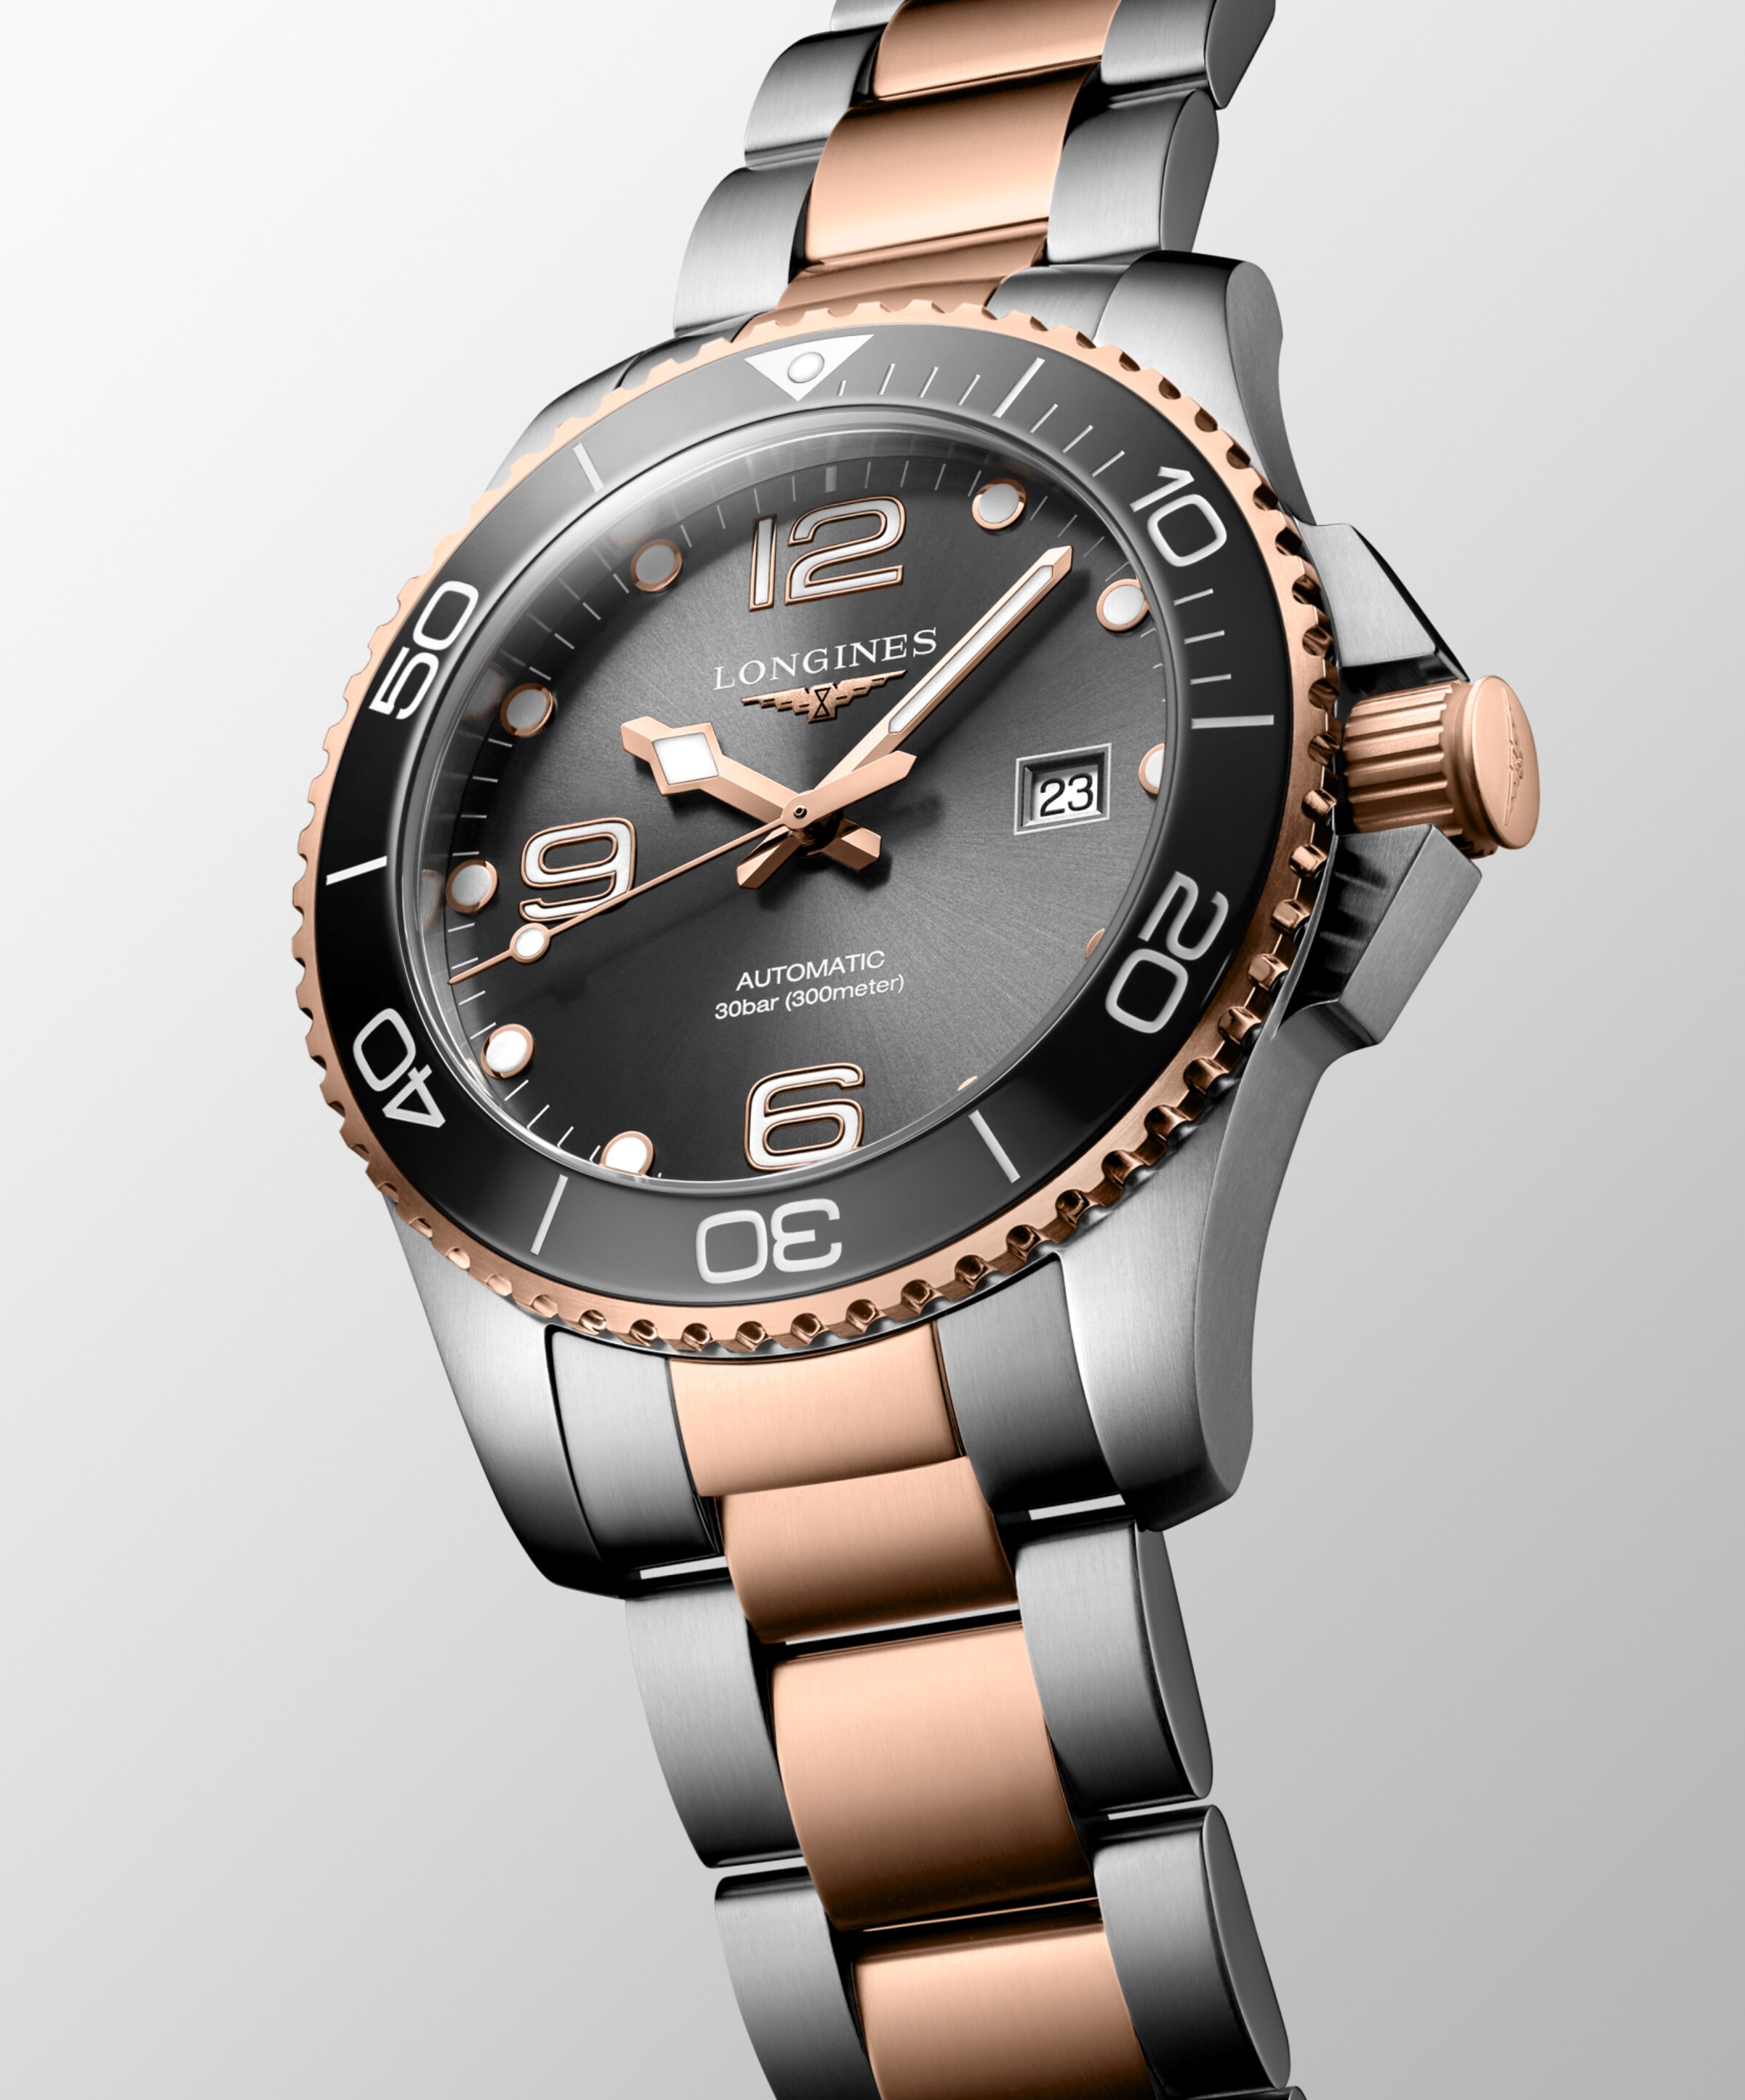 Longines HYDROCONQUEST Automatic Stainless steel and ceramic bezel Watch - L3.782.3.78.7